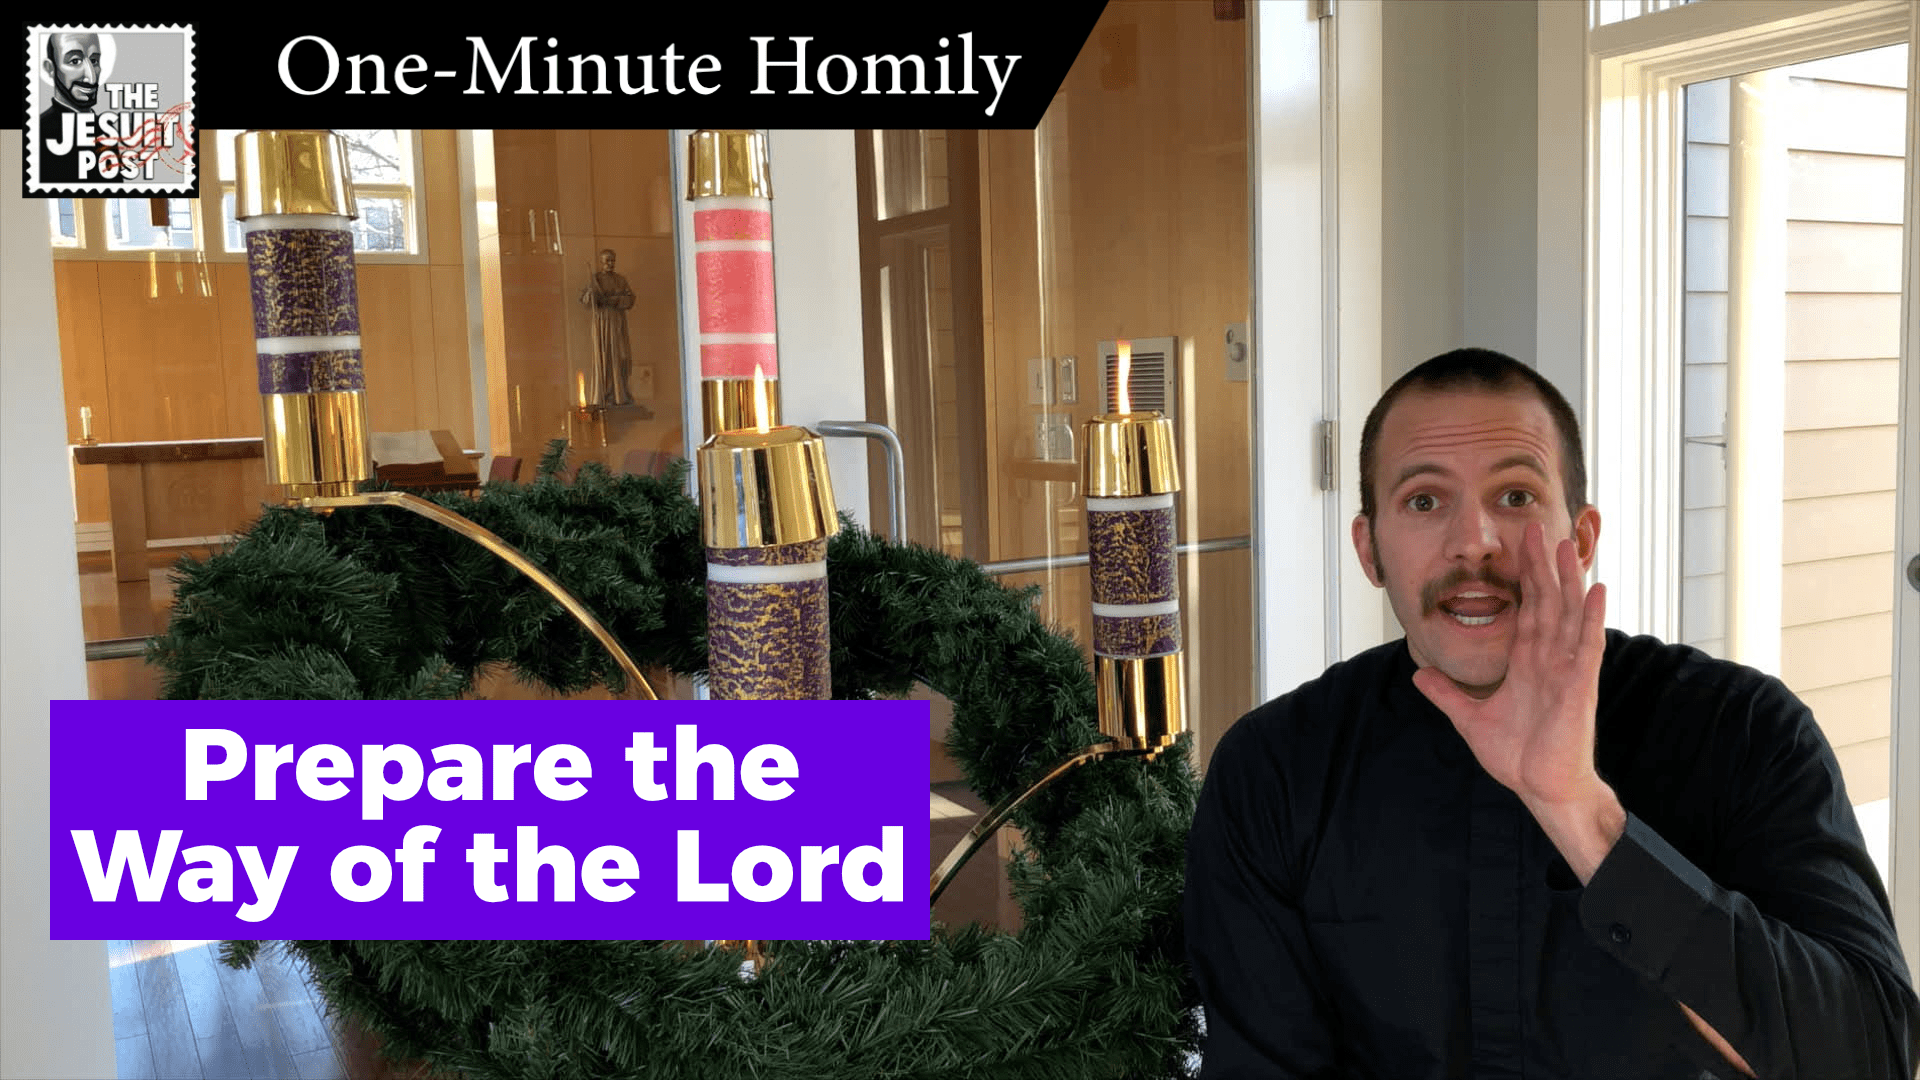 One-Minute Homily: Prepare the Way of the Lord